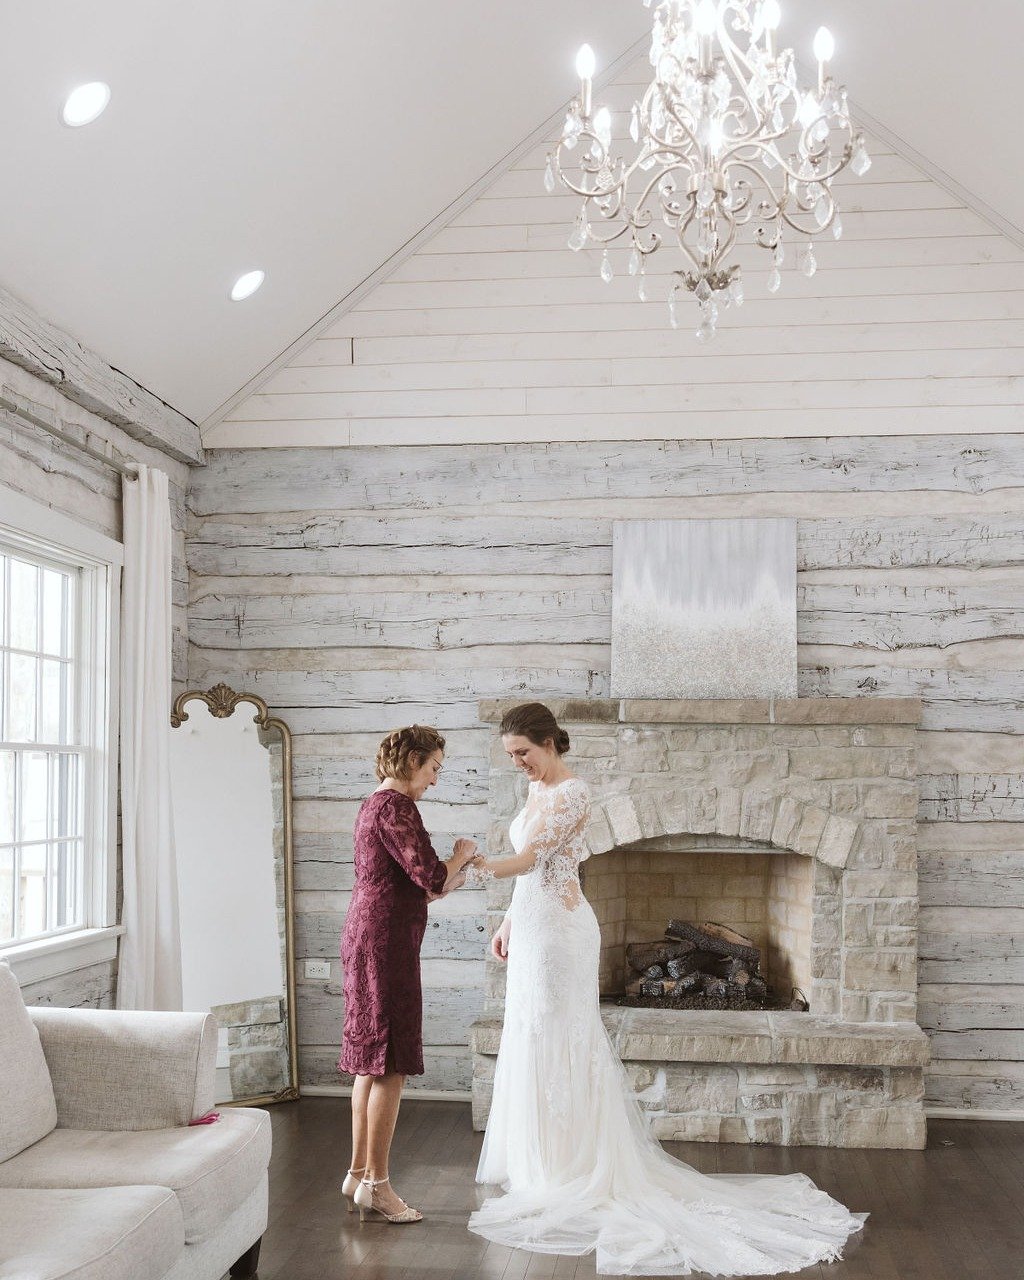 ✨👰Getting Ready Tips for the Big Day👰✨

1️⃣ Create a Chill Timeline:🕚 Add extra time for surprises to keep stress low. 
2️⃣ Hire Pros:💄 Let hair &amp; makeup pros pamper you.
3️⃣ Wear Comfy:🤗 Choose easy-off attire for fuss-free prep.
4️⃣ Snack 